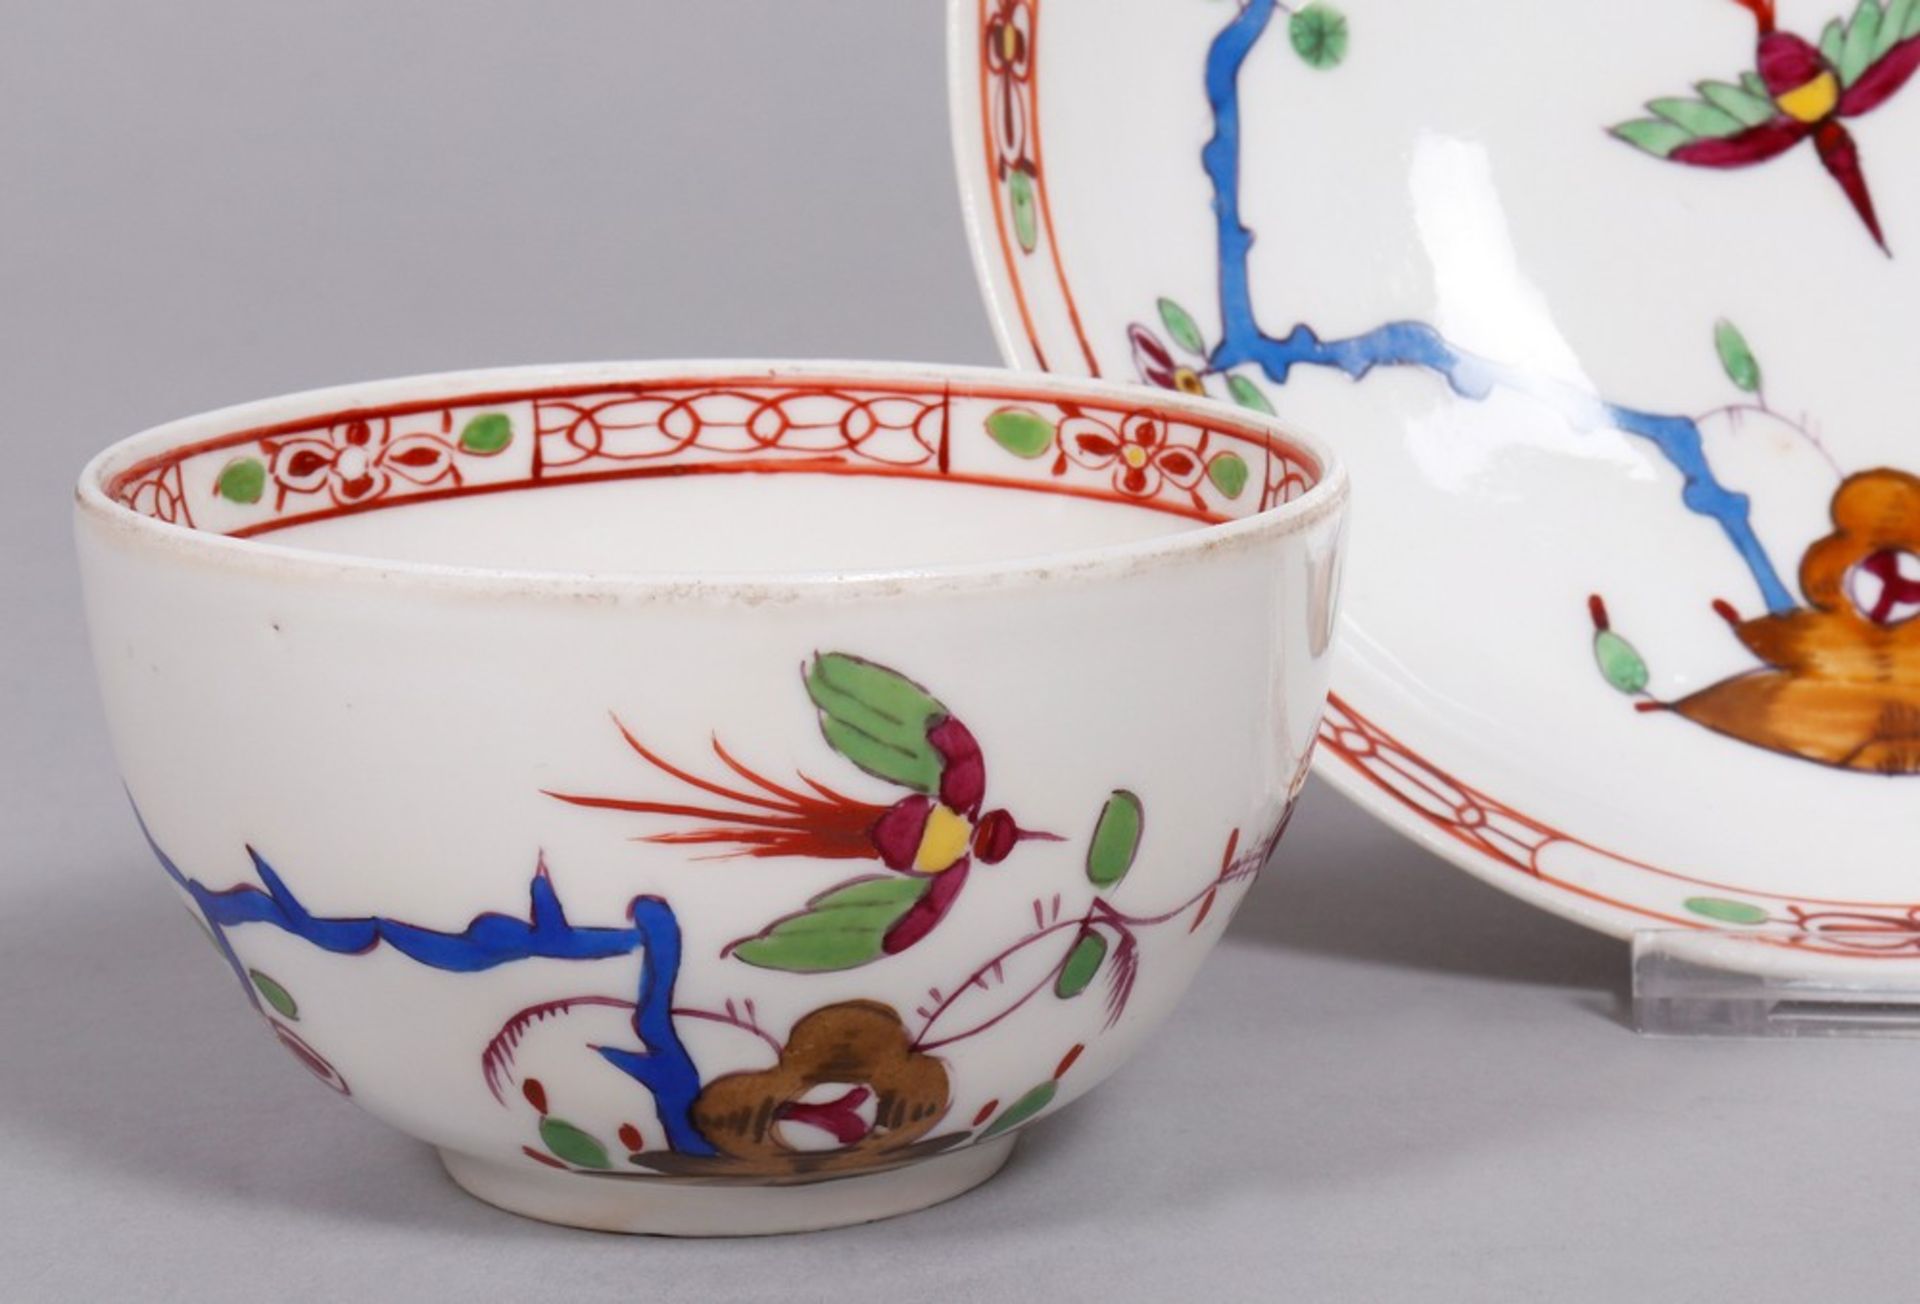 Cup and saucer, Meissen, decor "Fels und Vogel", Marcolini period (c. 1800) - Image 3 of 4